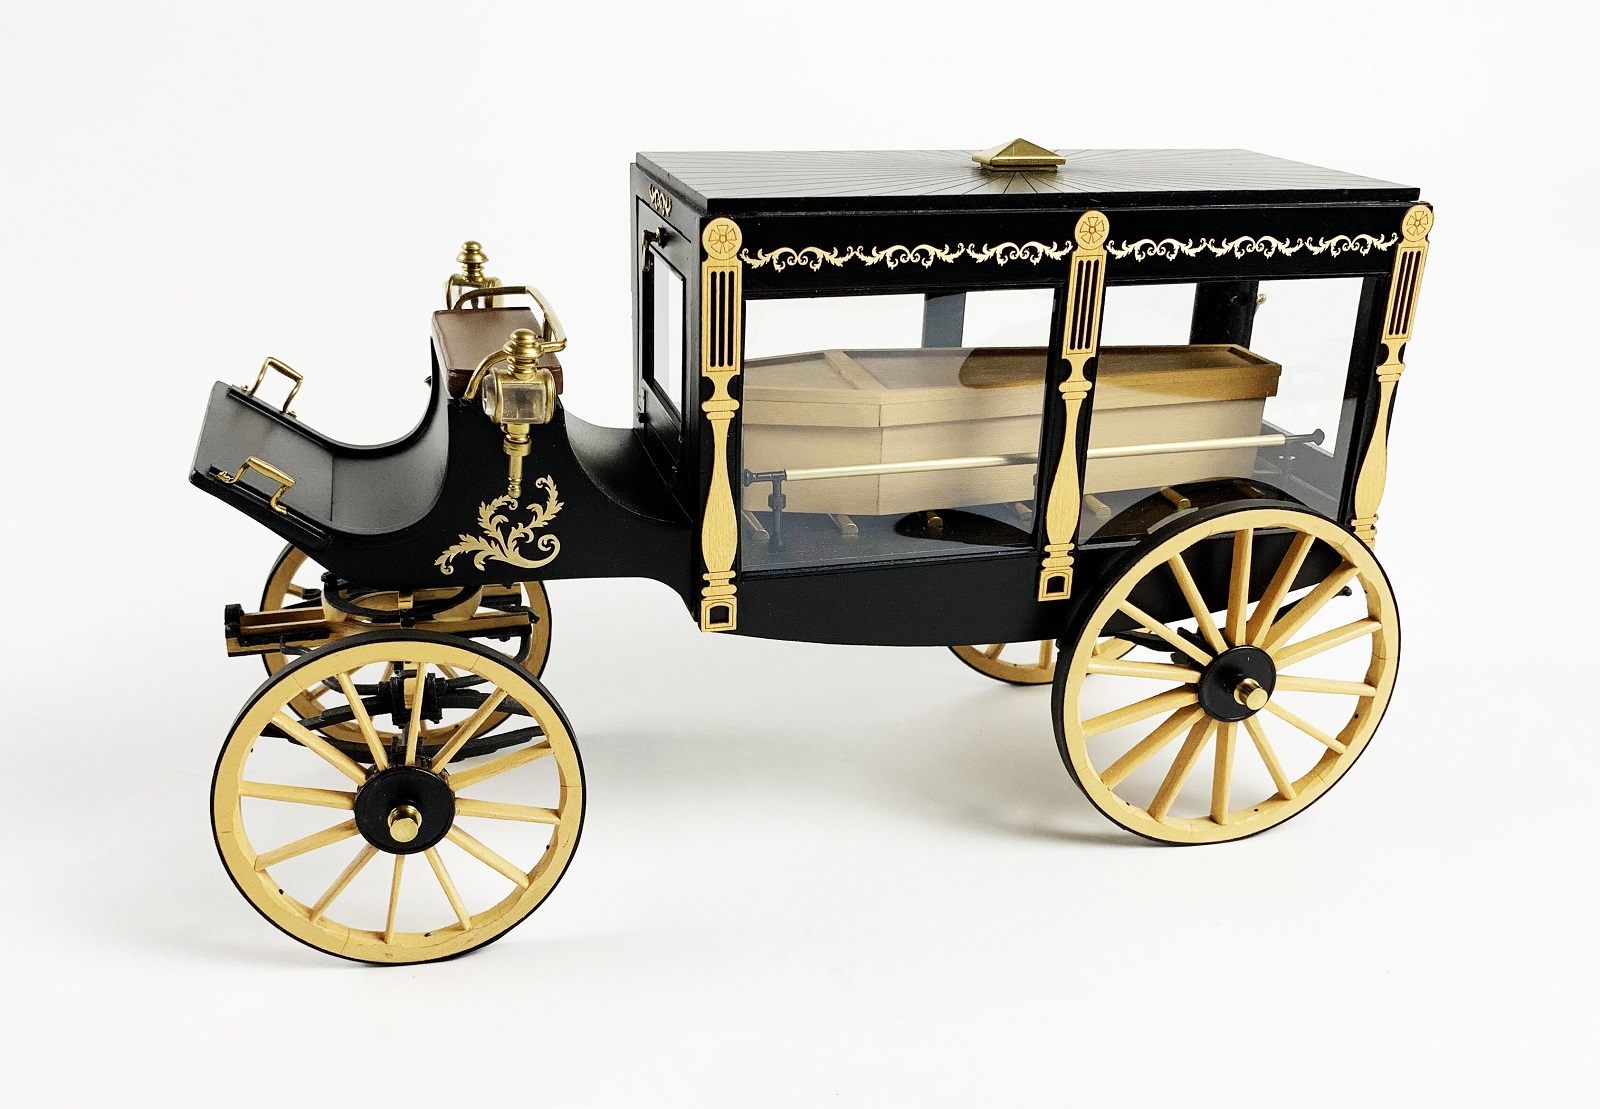 Details about   Model Trailways MS6009 1895 Horse-Drawn Hearse Wagon 1:12 Scale Wood & Metal ... 